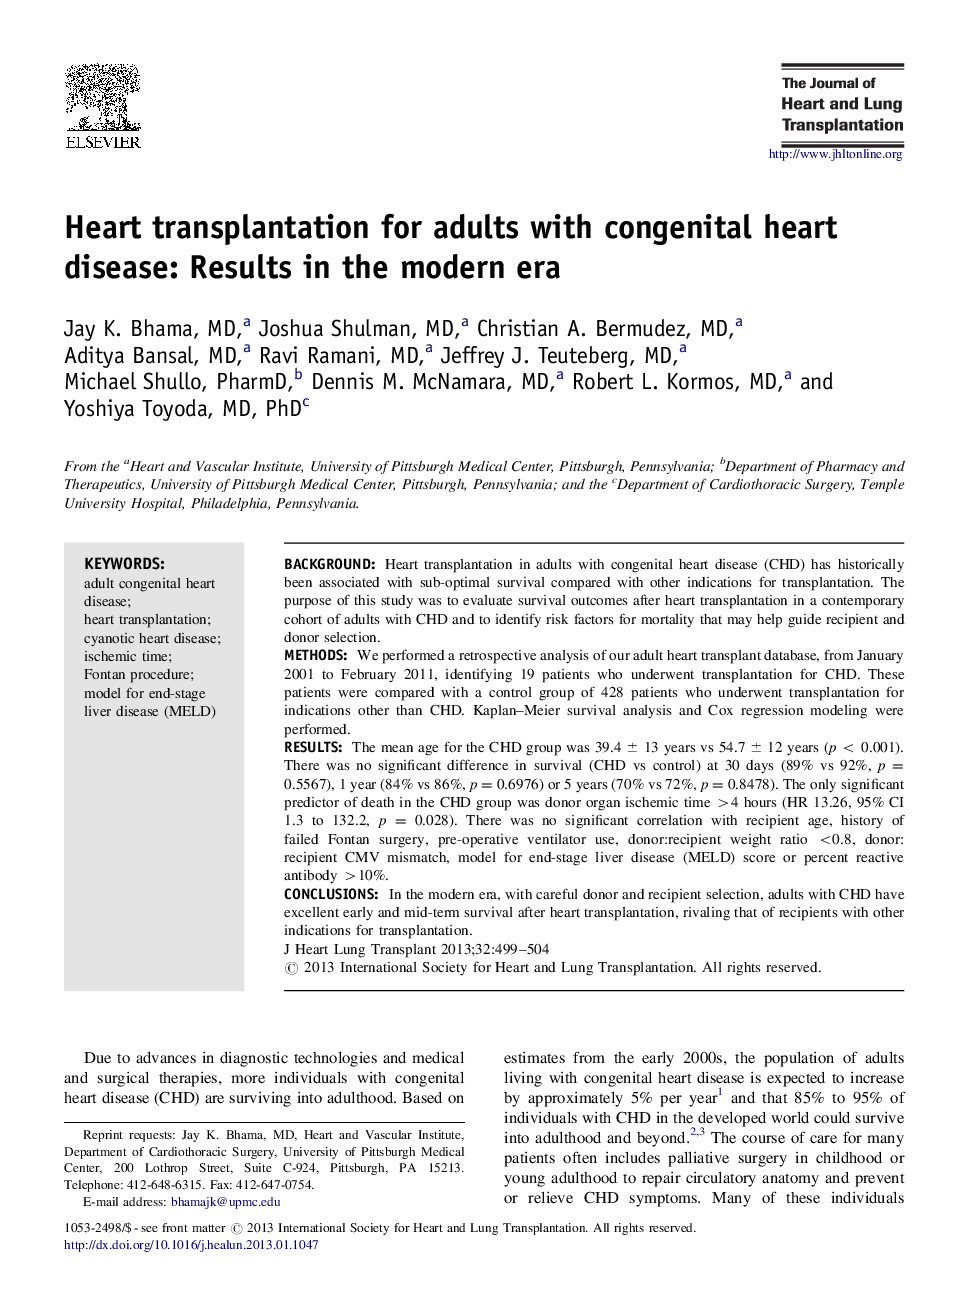 Heart transplantation for adults with congenital heart disease: Results in the modern era